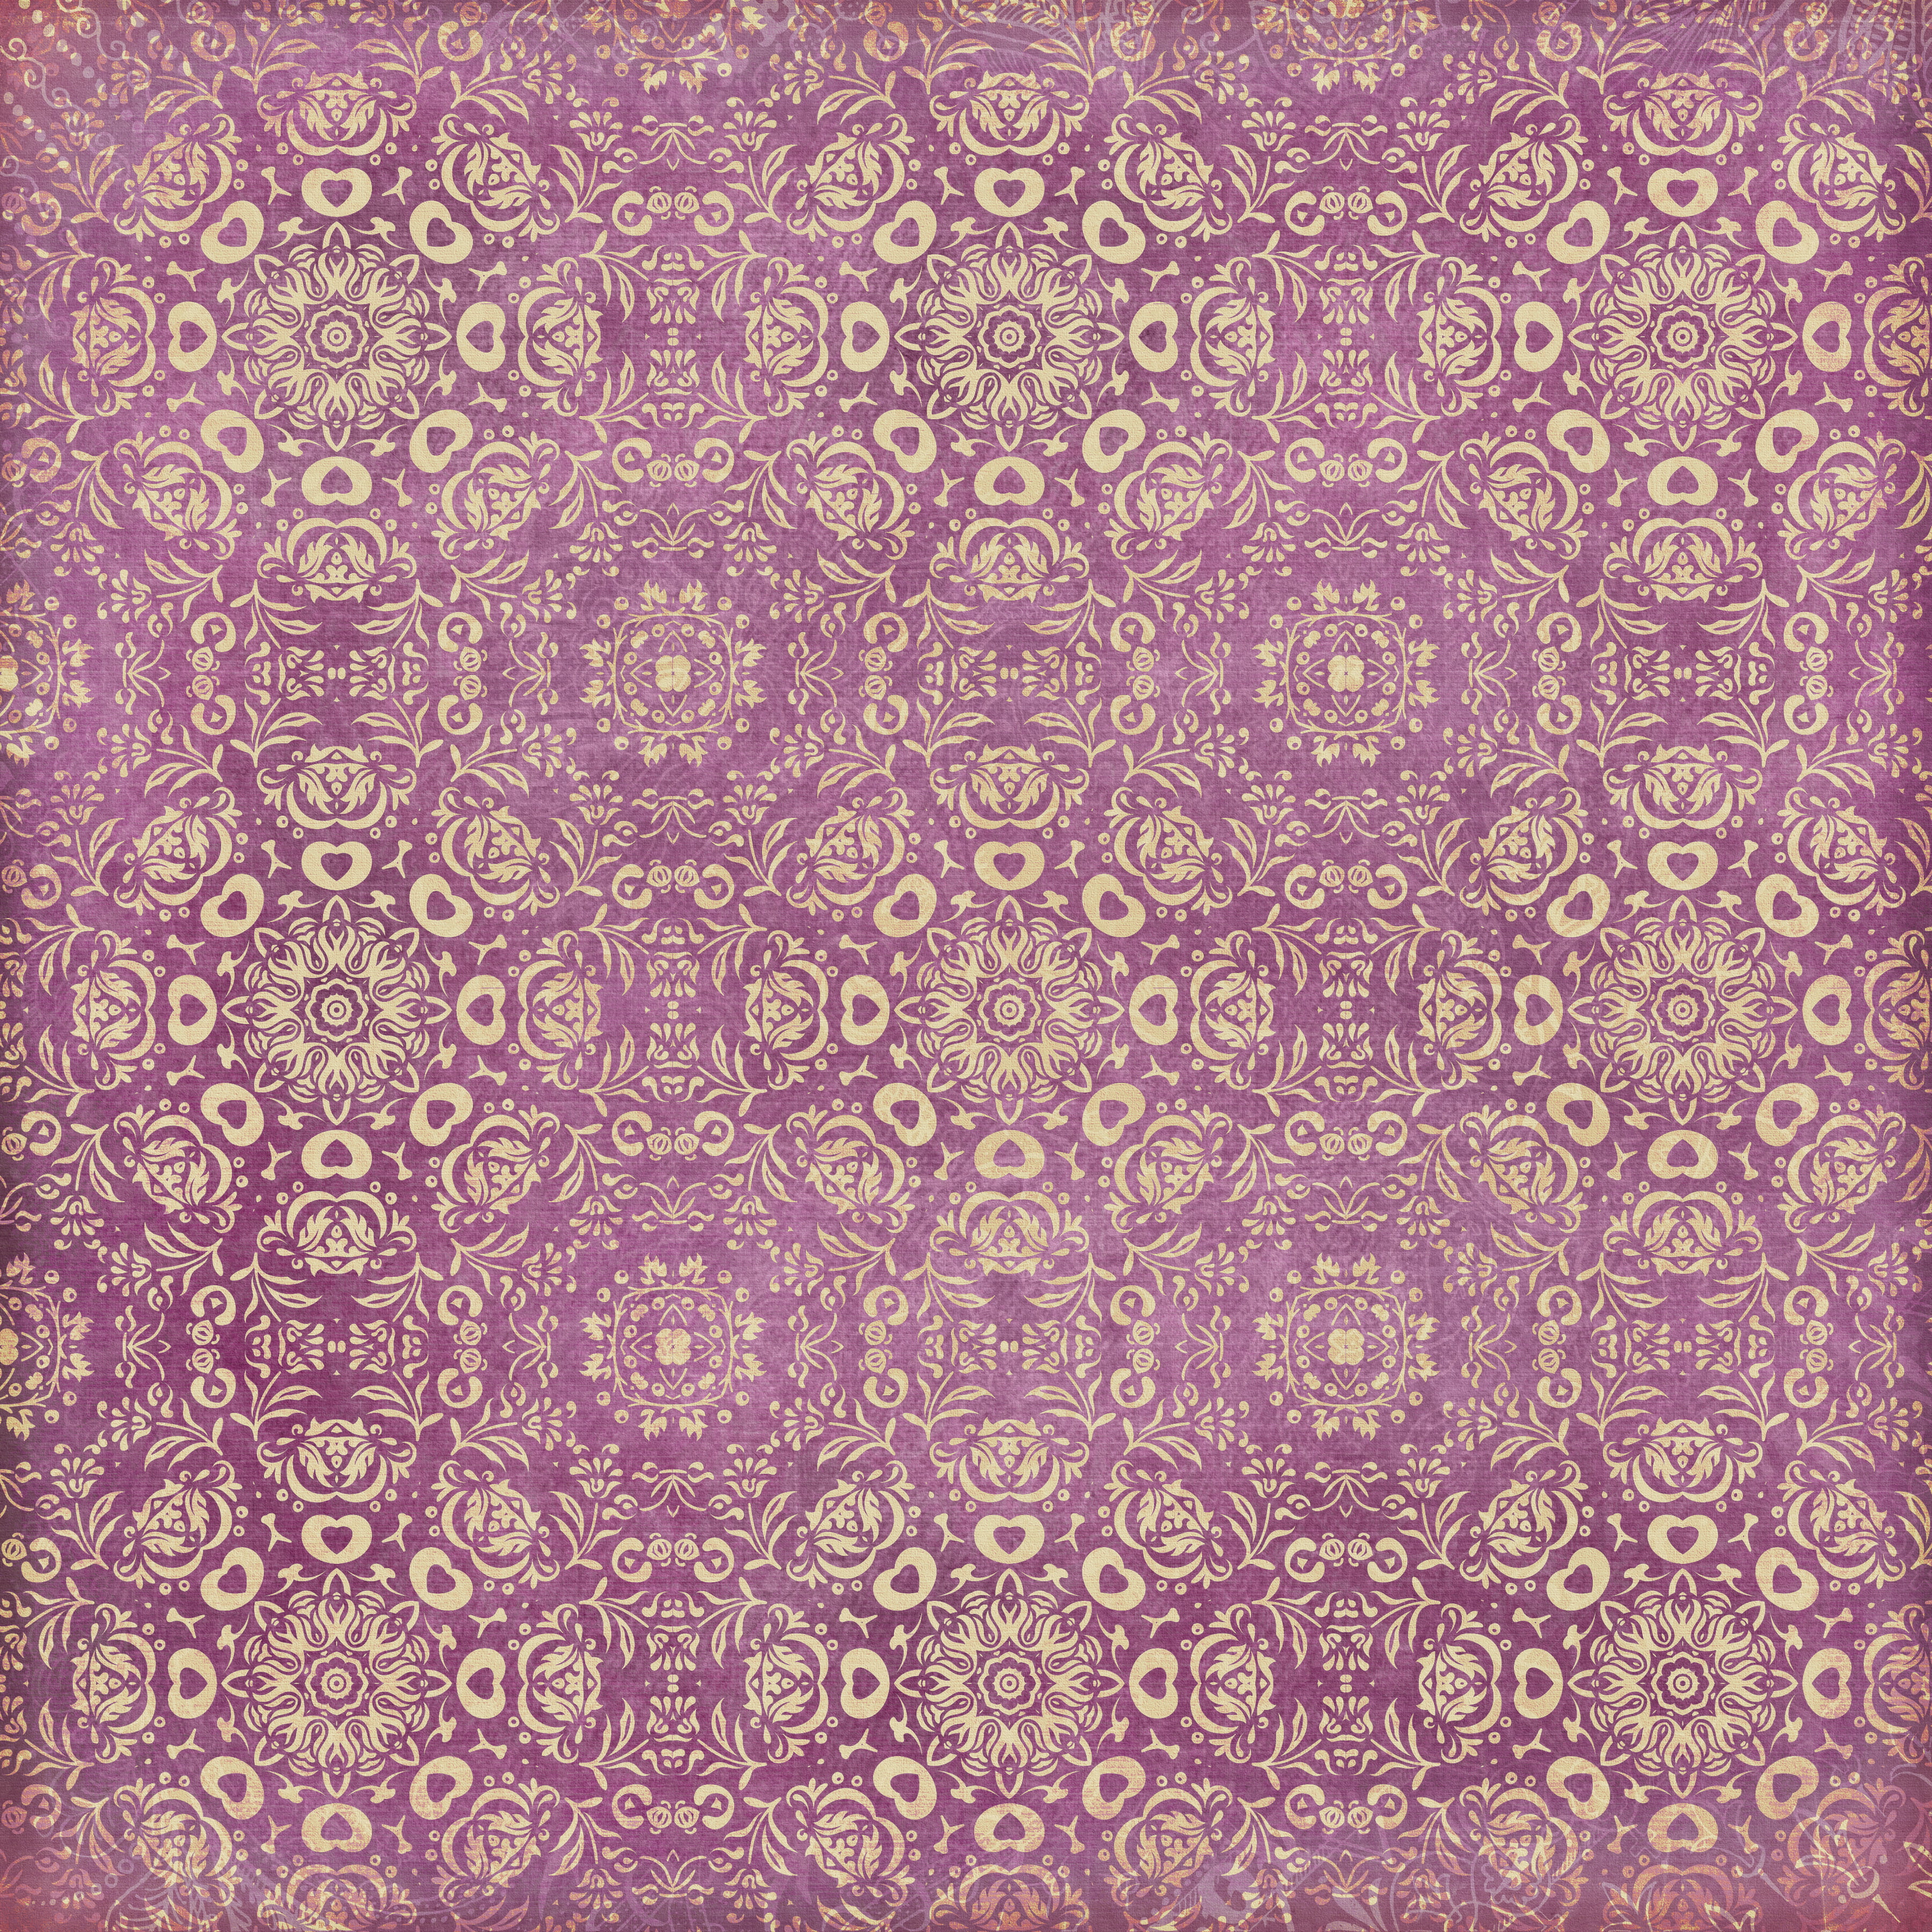 purple and white floral illustration, background, wallpaper, ornament